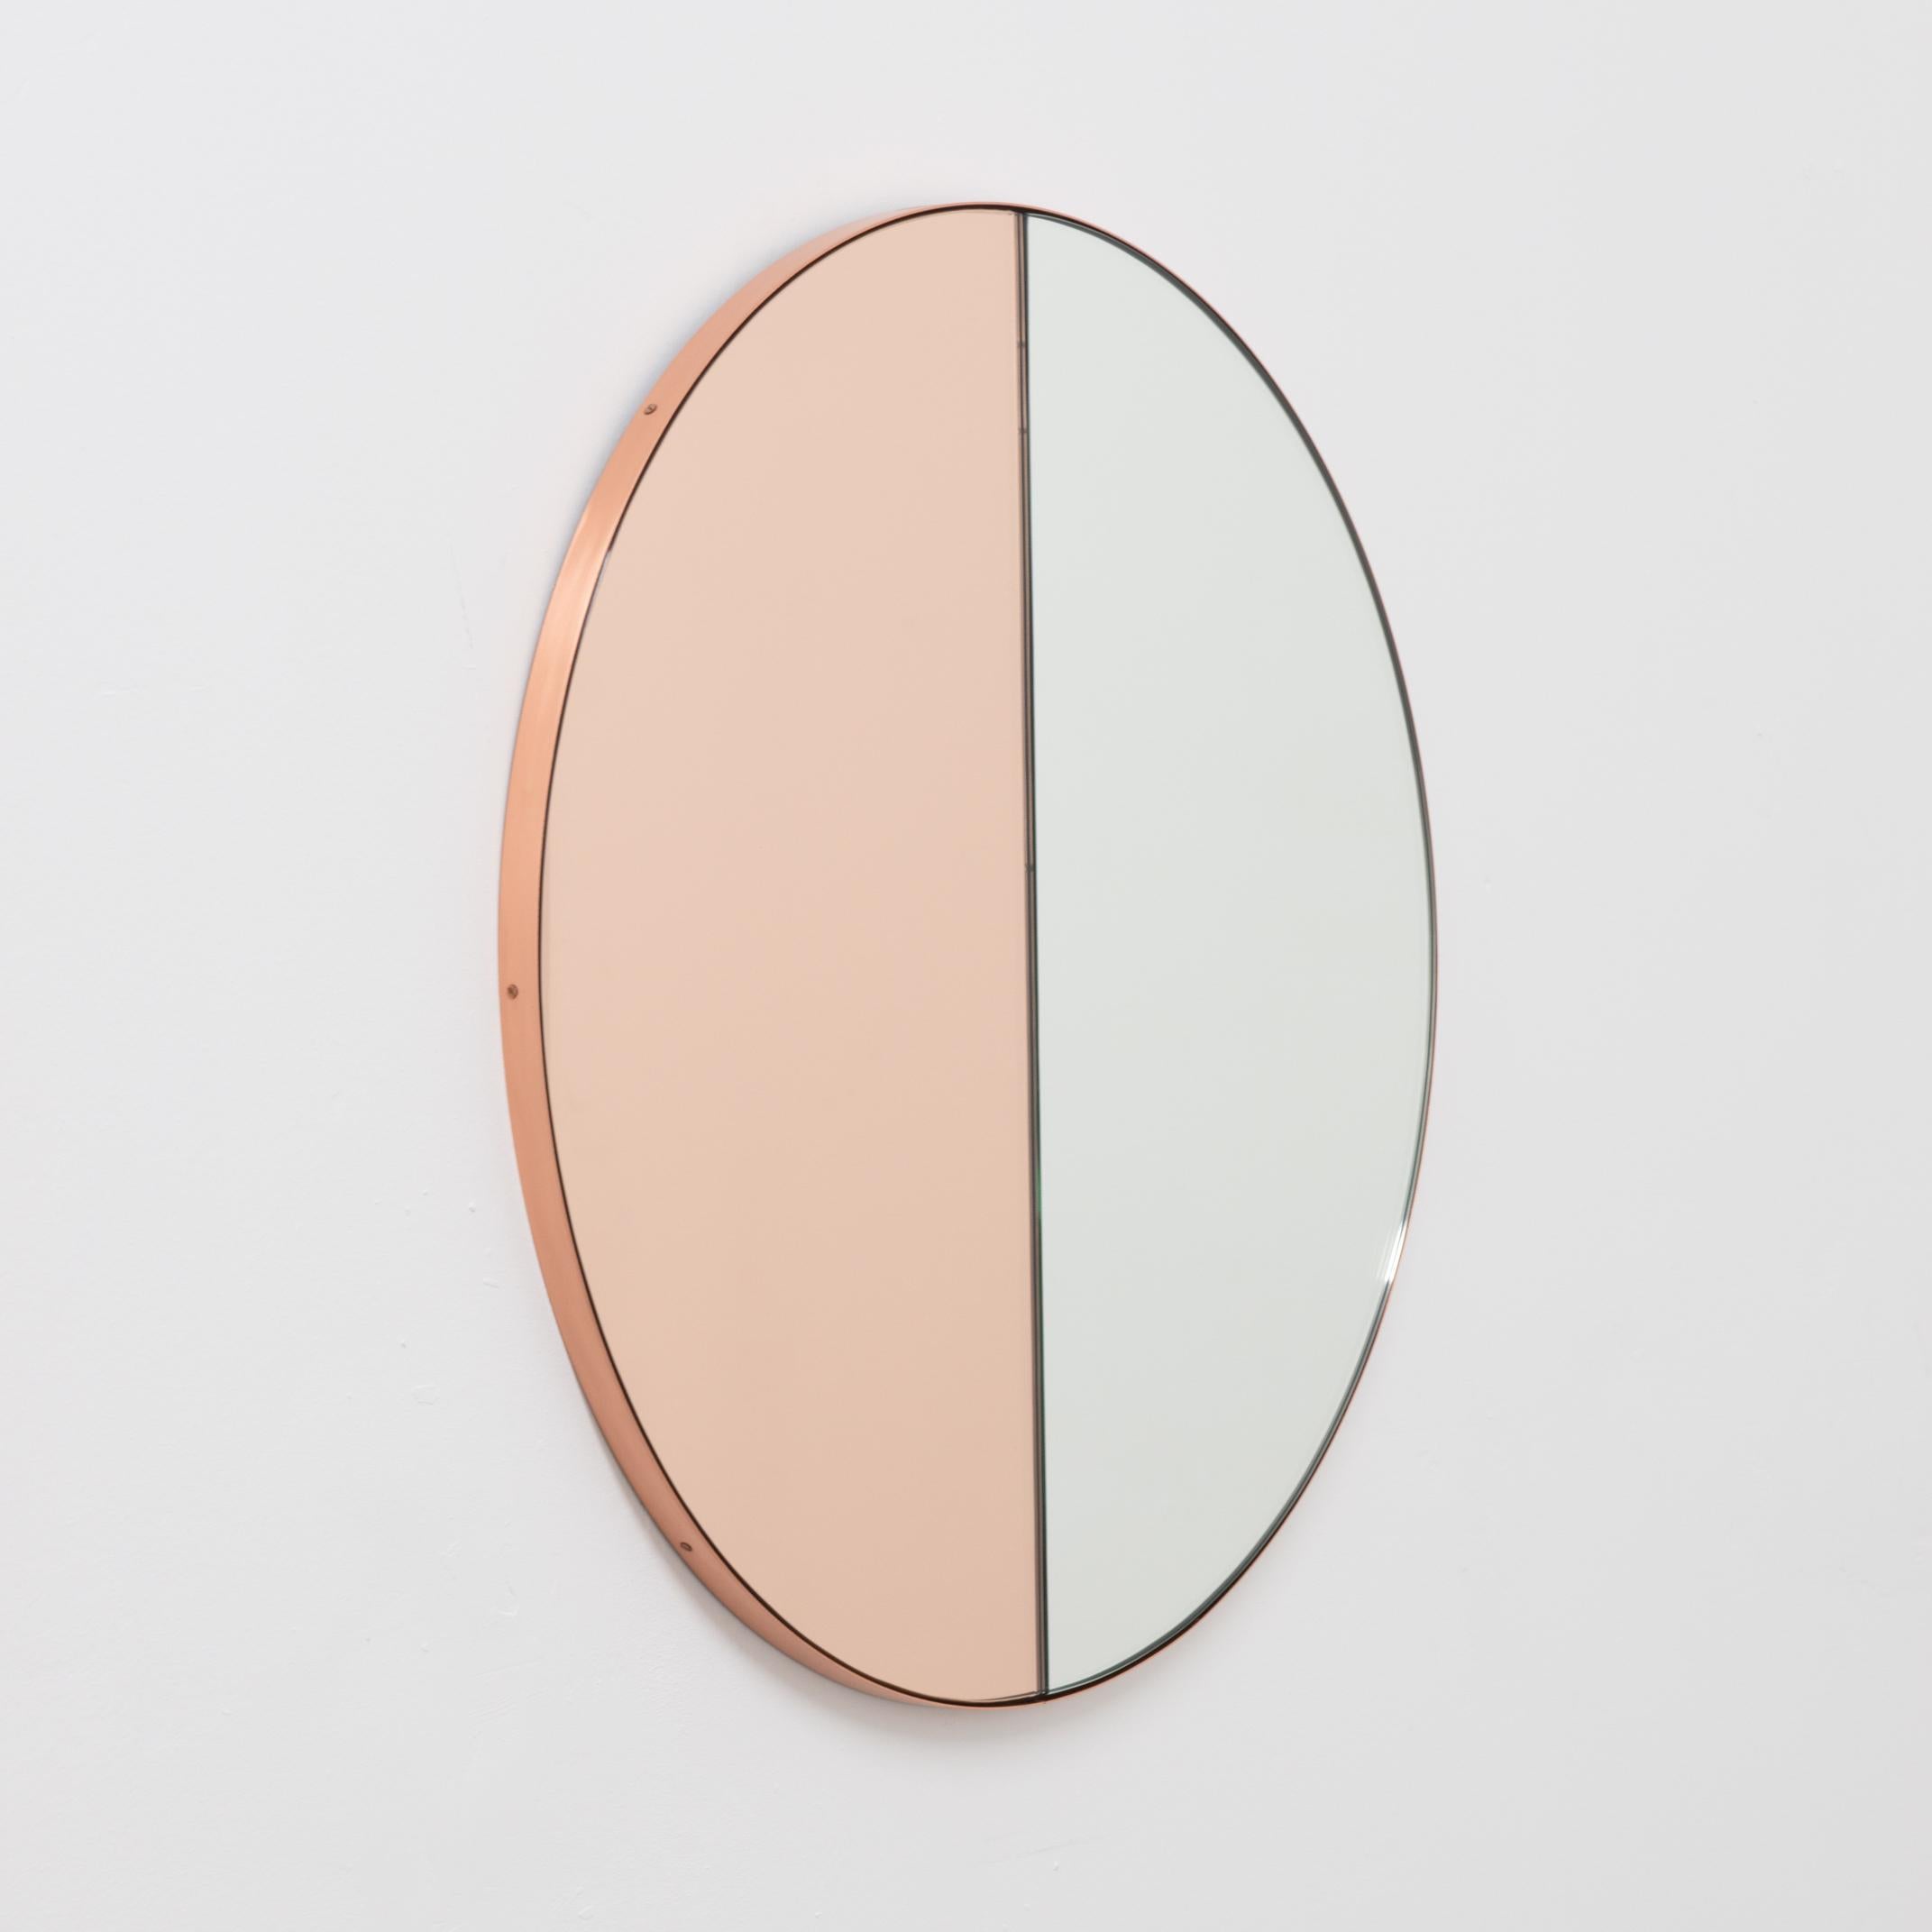 Contemporary mixed tinted (silver & rose gold / peach) Orbis Dualis™ mirror with a chic brushed copper frame. Fitted with a quality hanging system that allows a flexible installation in 6 different positions (see pictures for reference). Designed